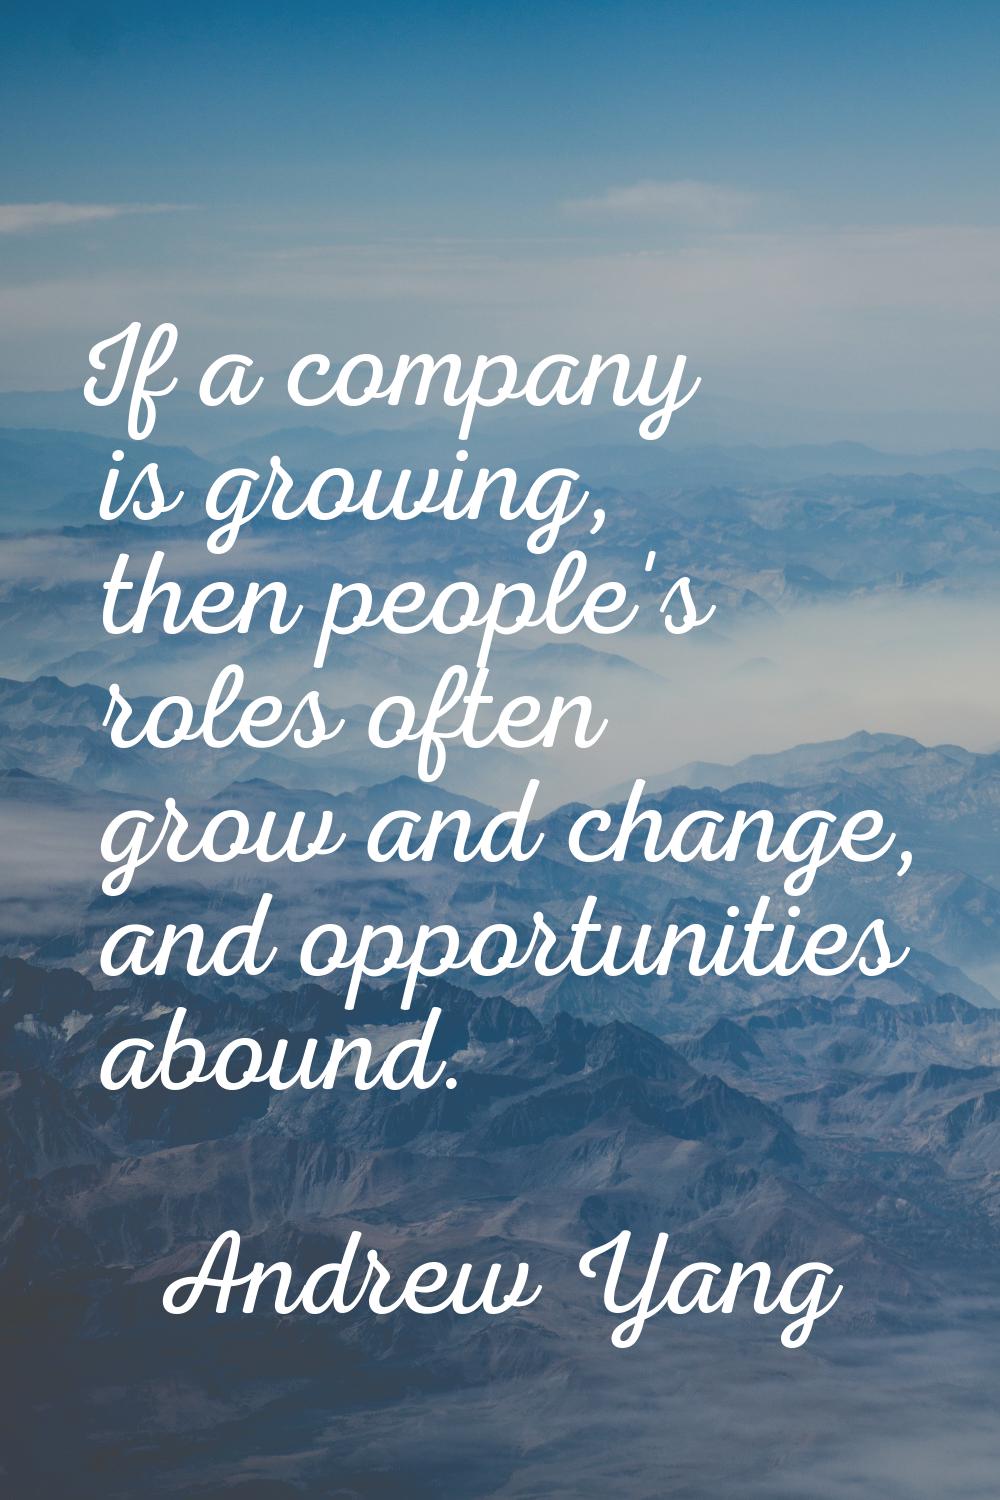 If a company is growing, then people's roles often grow and change, and opportunities abound.